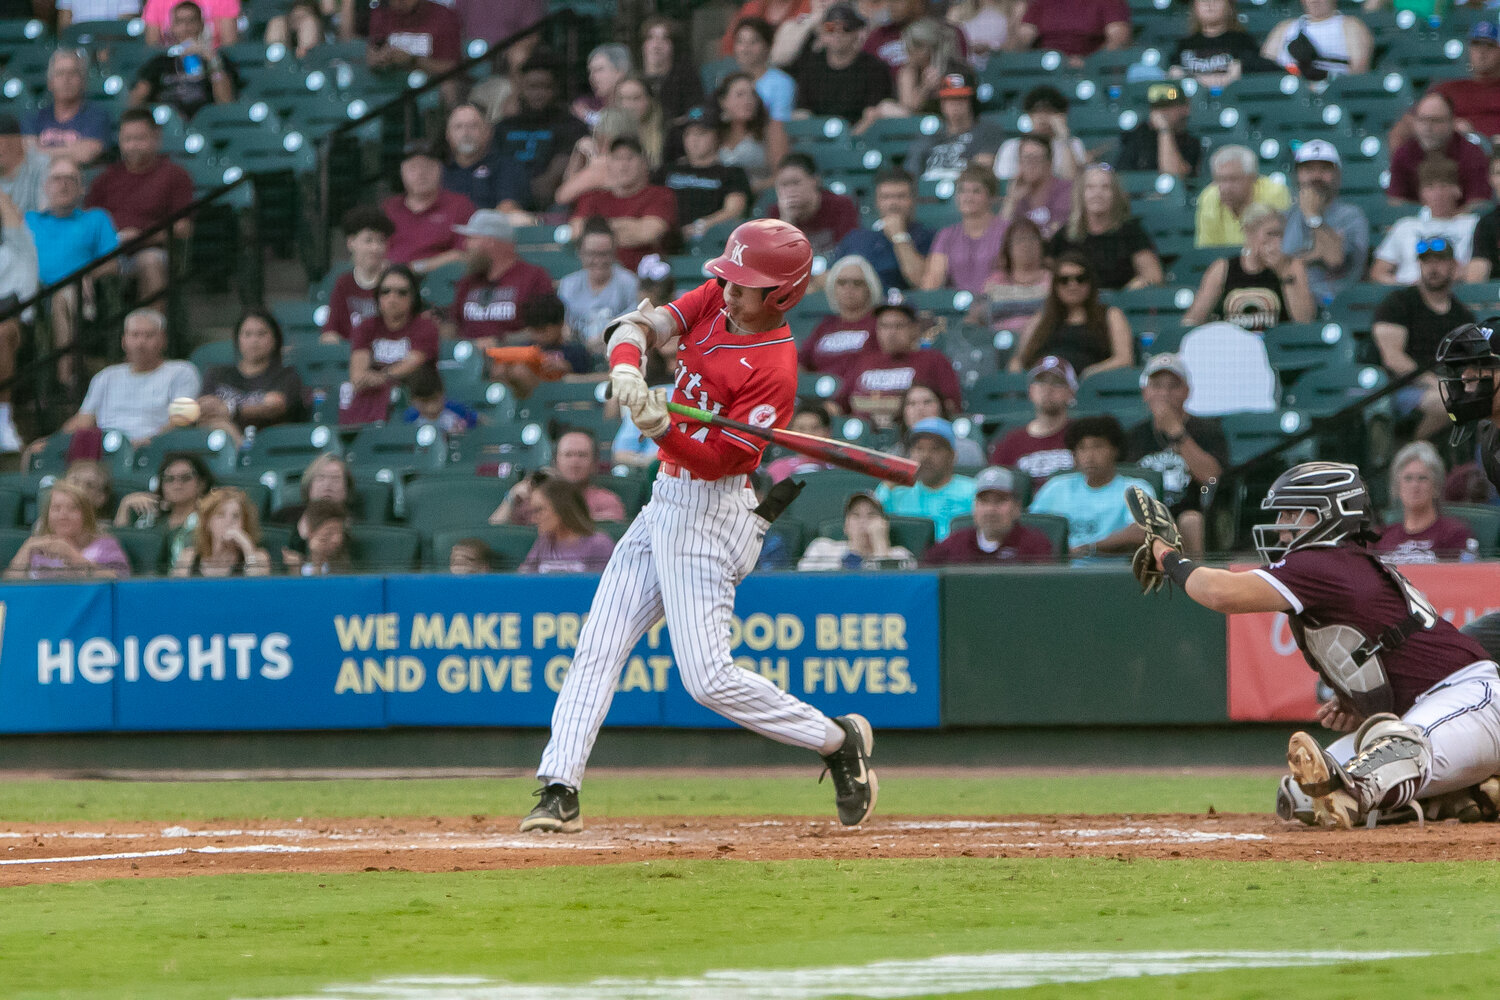 AJ Atkinson hits during Friday's Regional Final between Katy and Pearland at Constellation Field in Sugar Land.